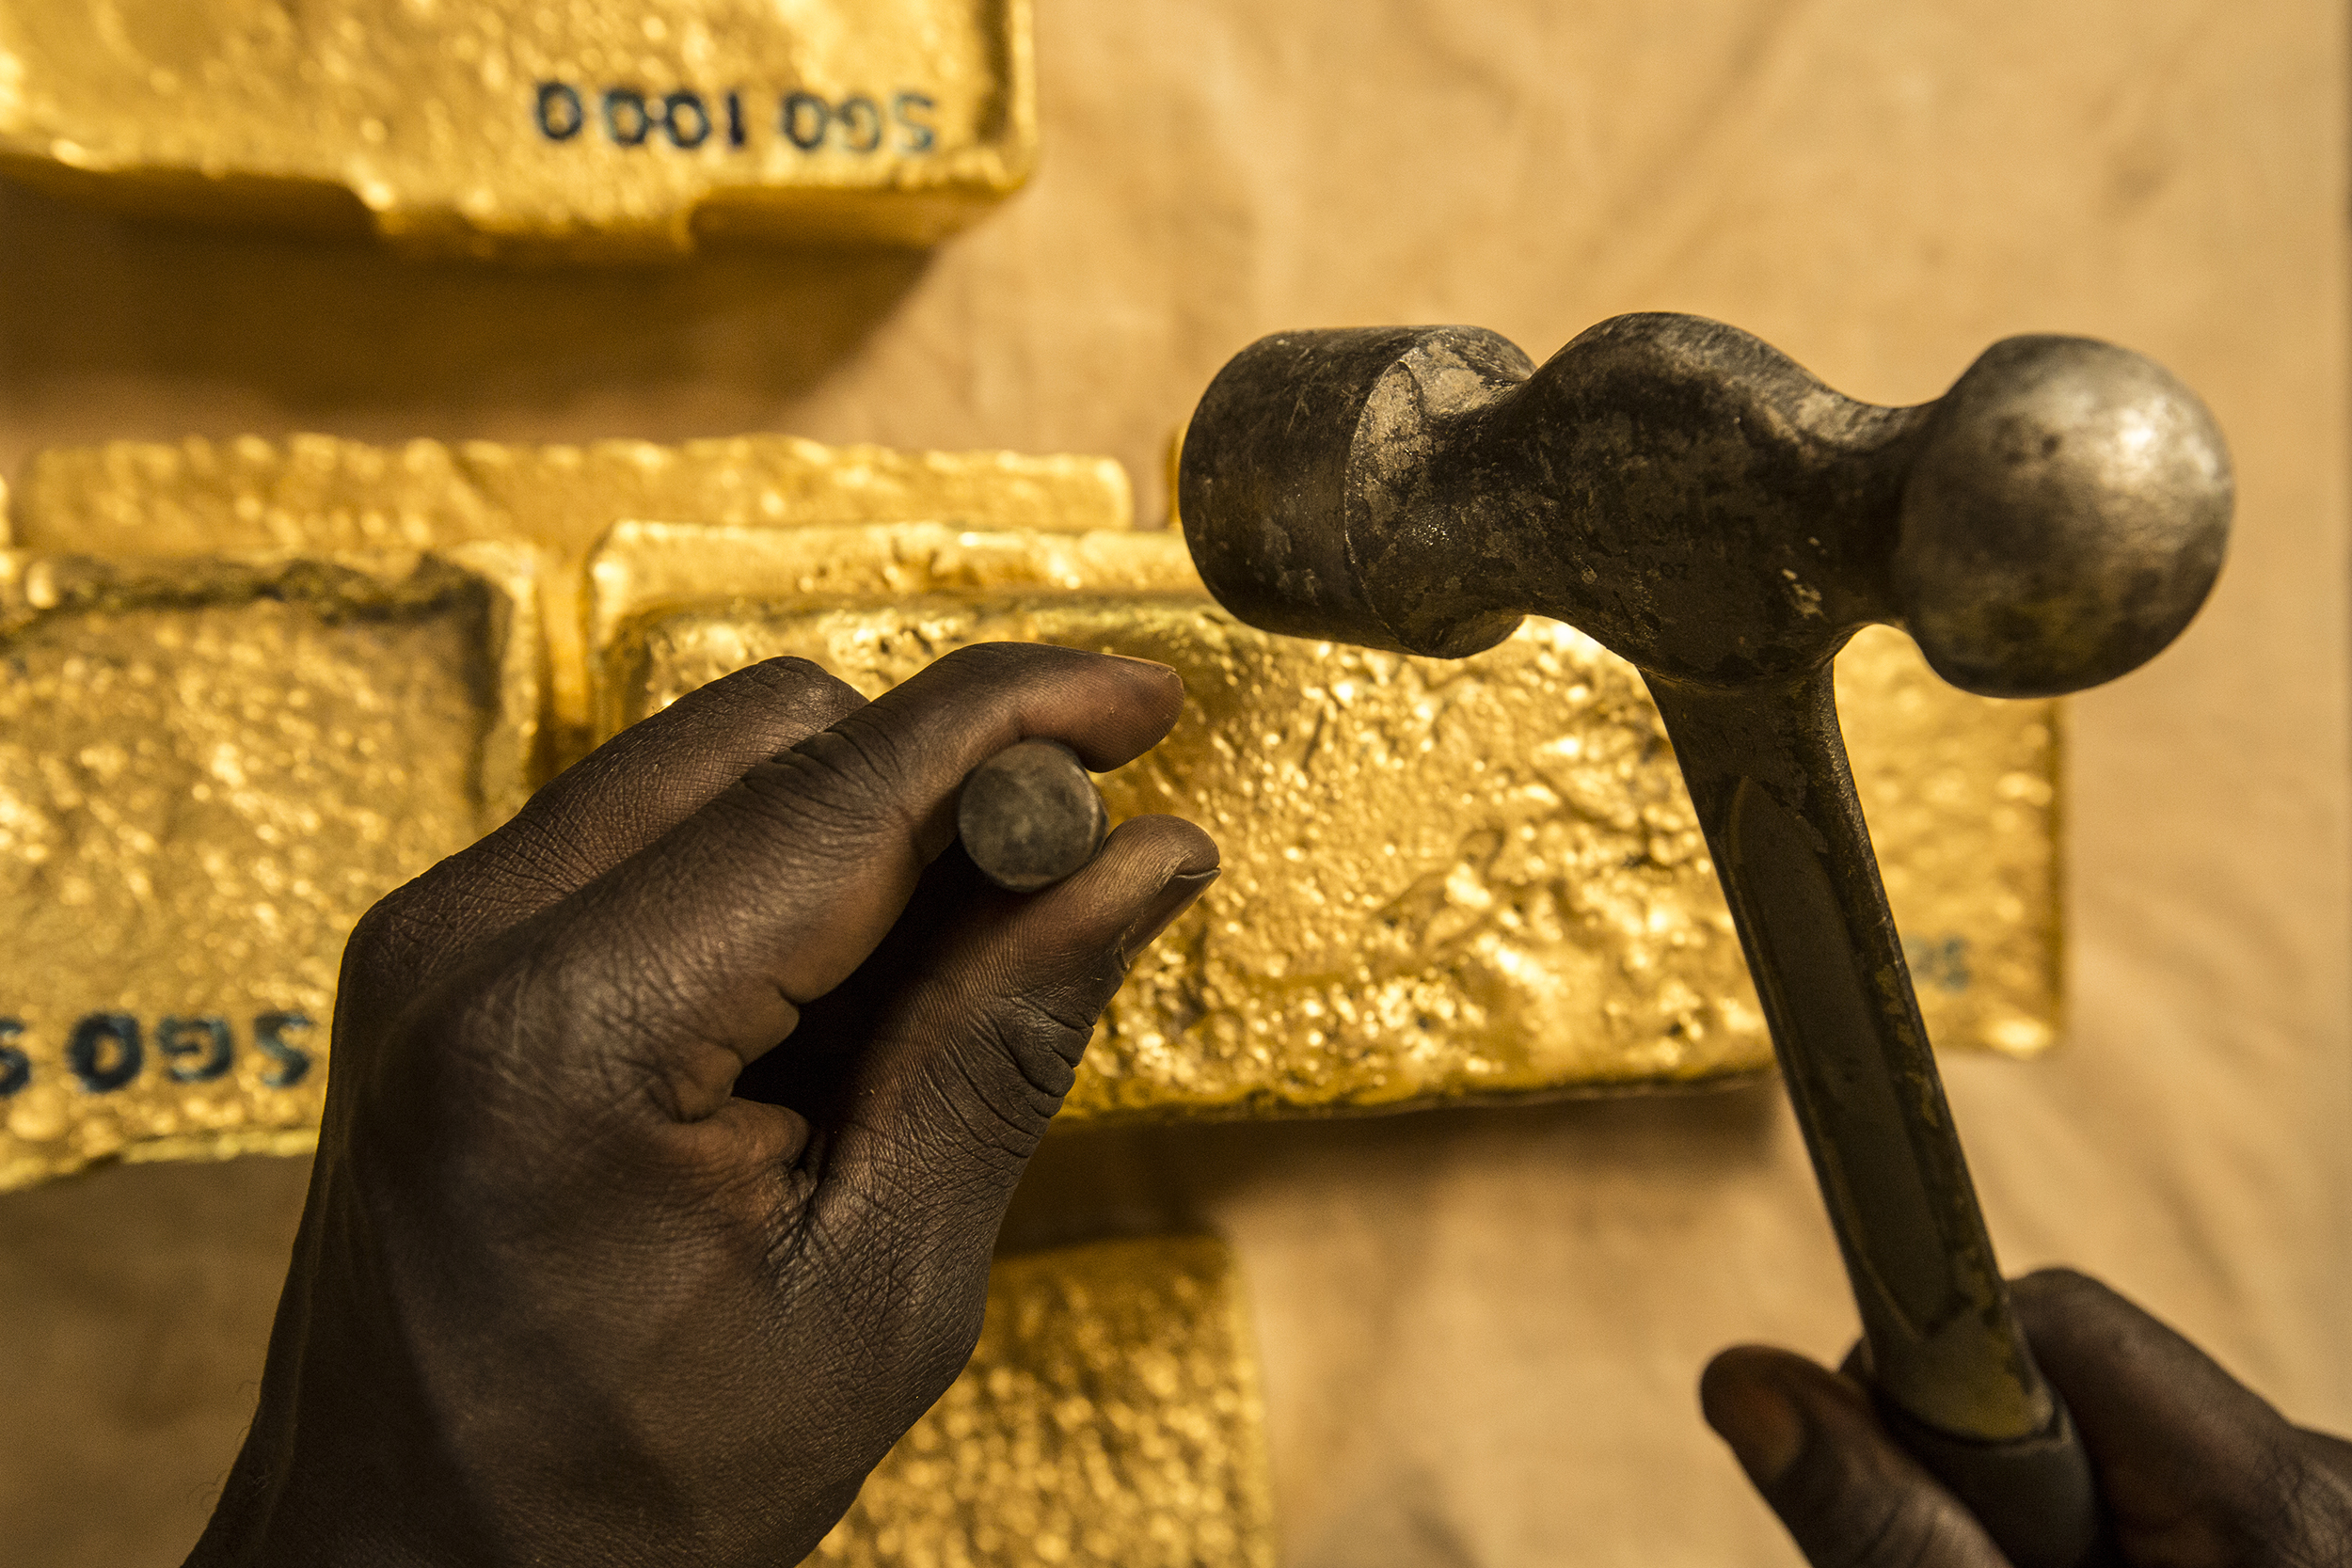  Stamping Newly Poured Gold Bars, Africa, 2012.&nbsp; Edition of 3. 